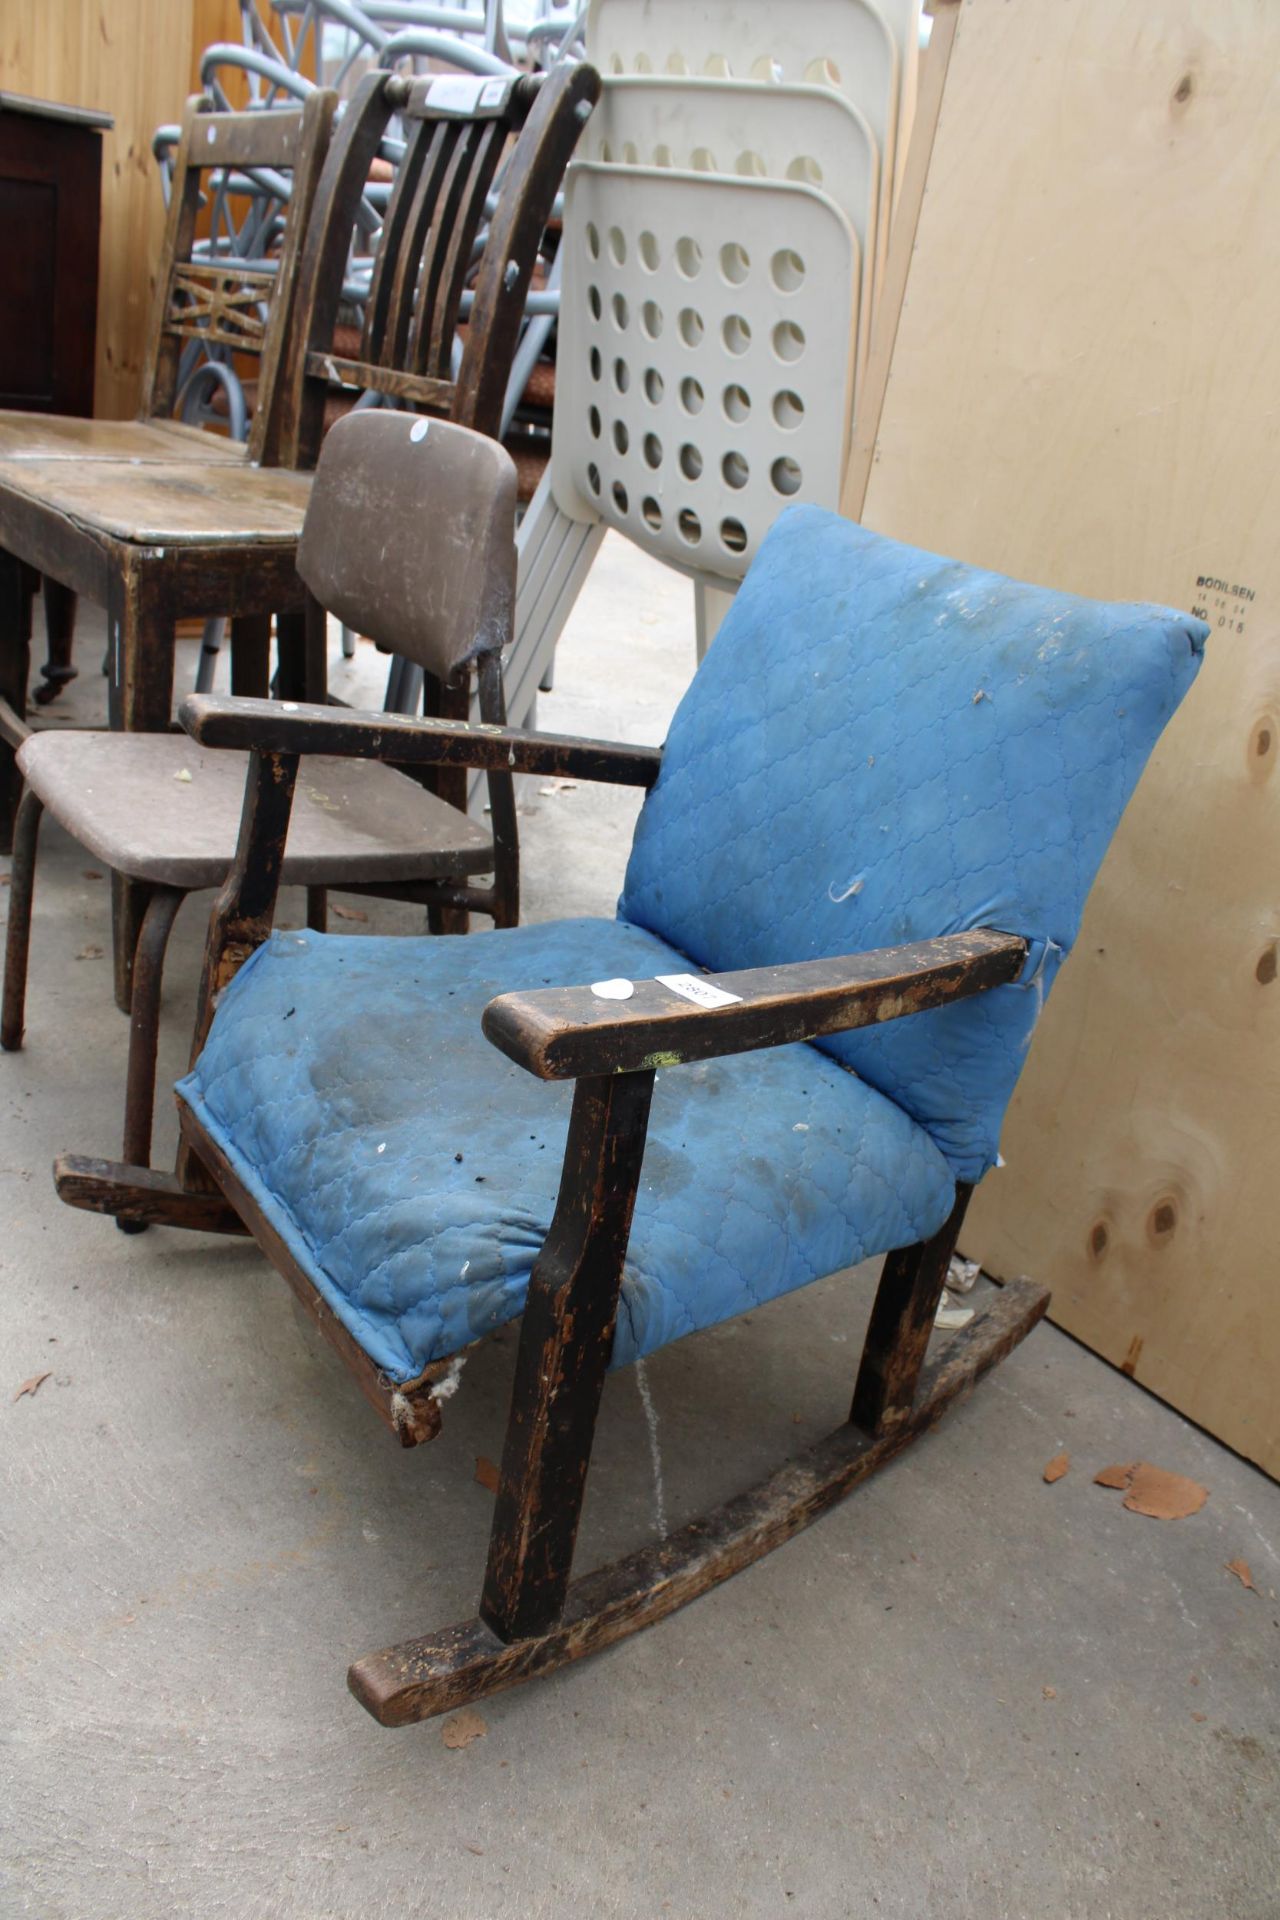 A MID 20TH CENTURY CHILDS ROCKING CHAIR AND COUNTIES FURNITURE GROUP CHILDS PLASTIC CHAIR - Image 2 of 2